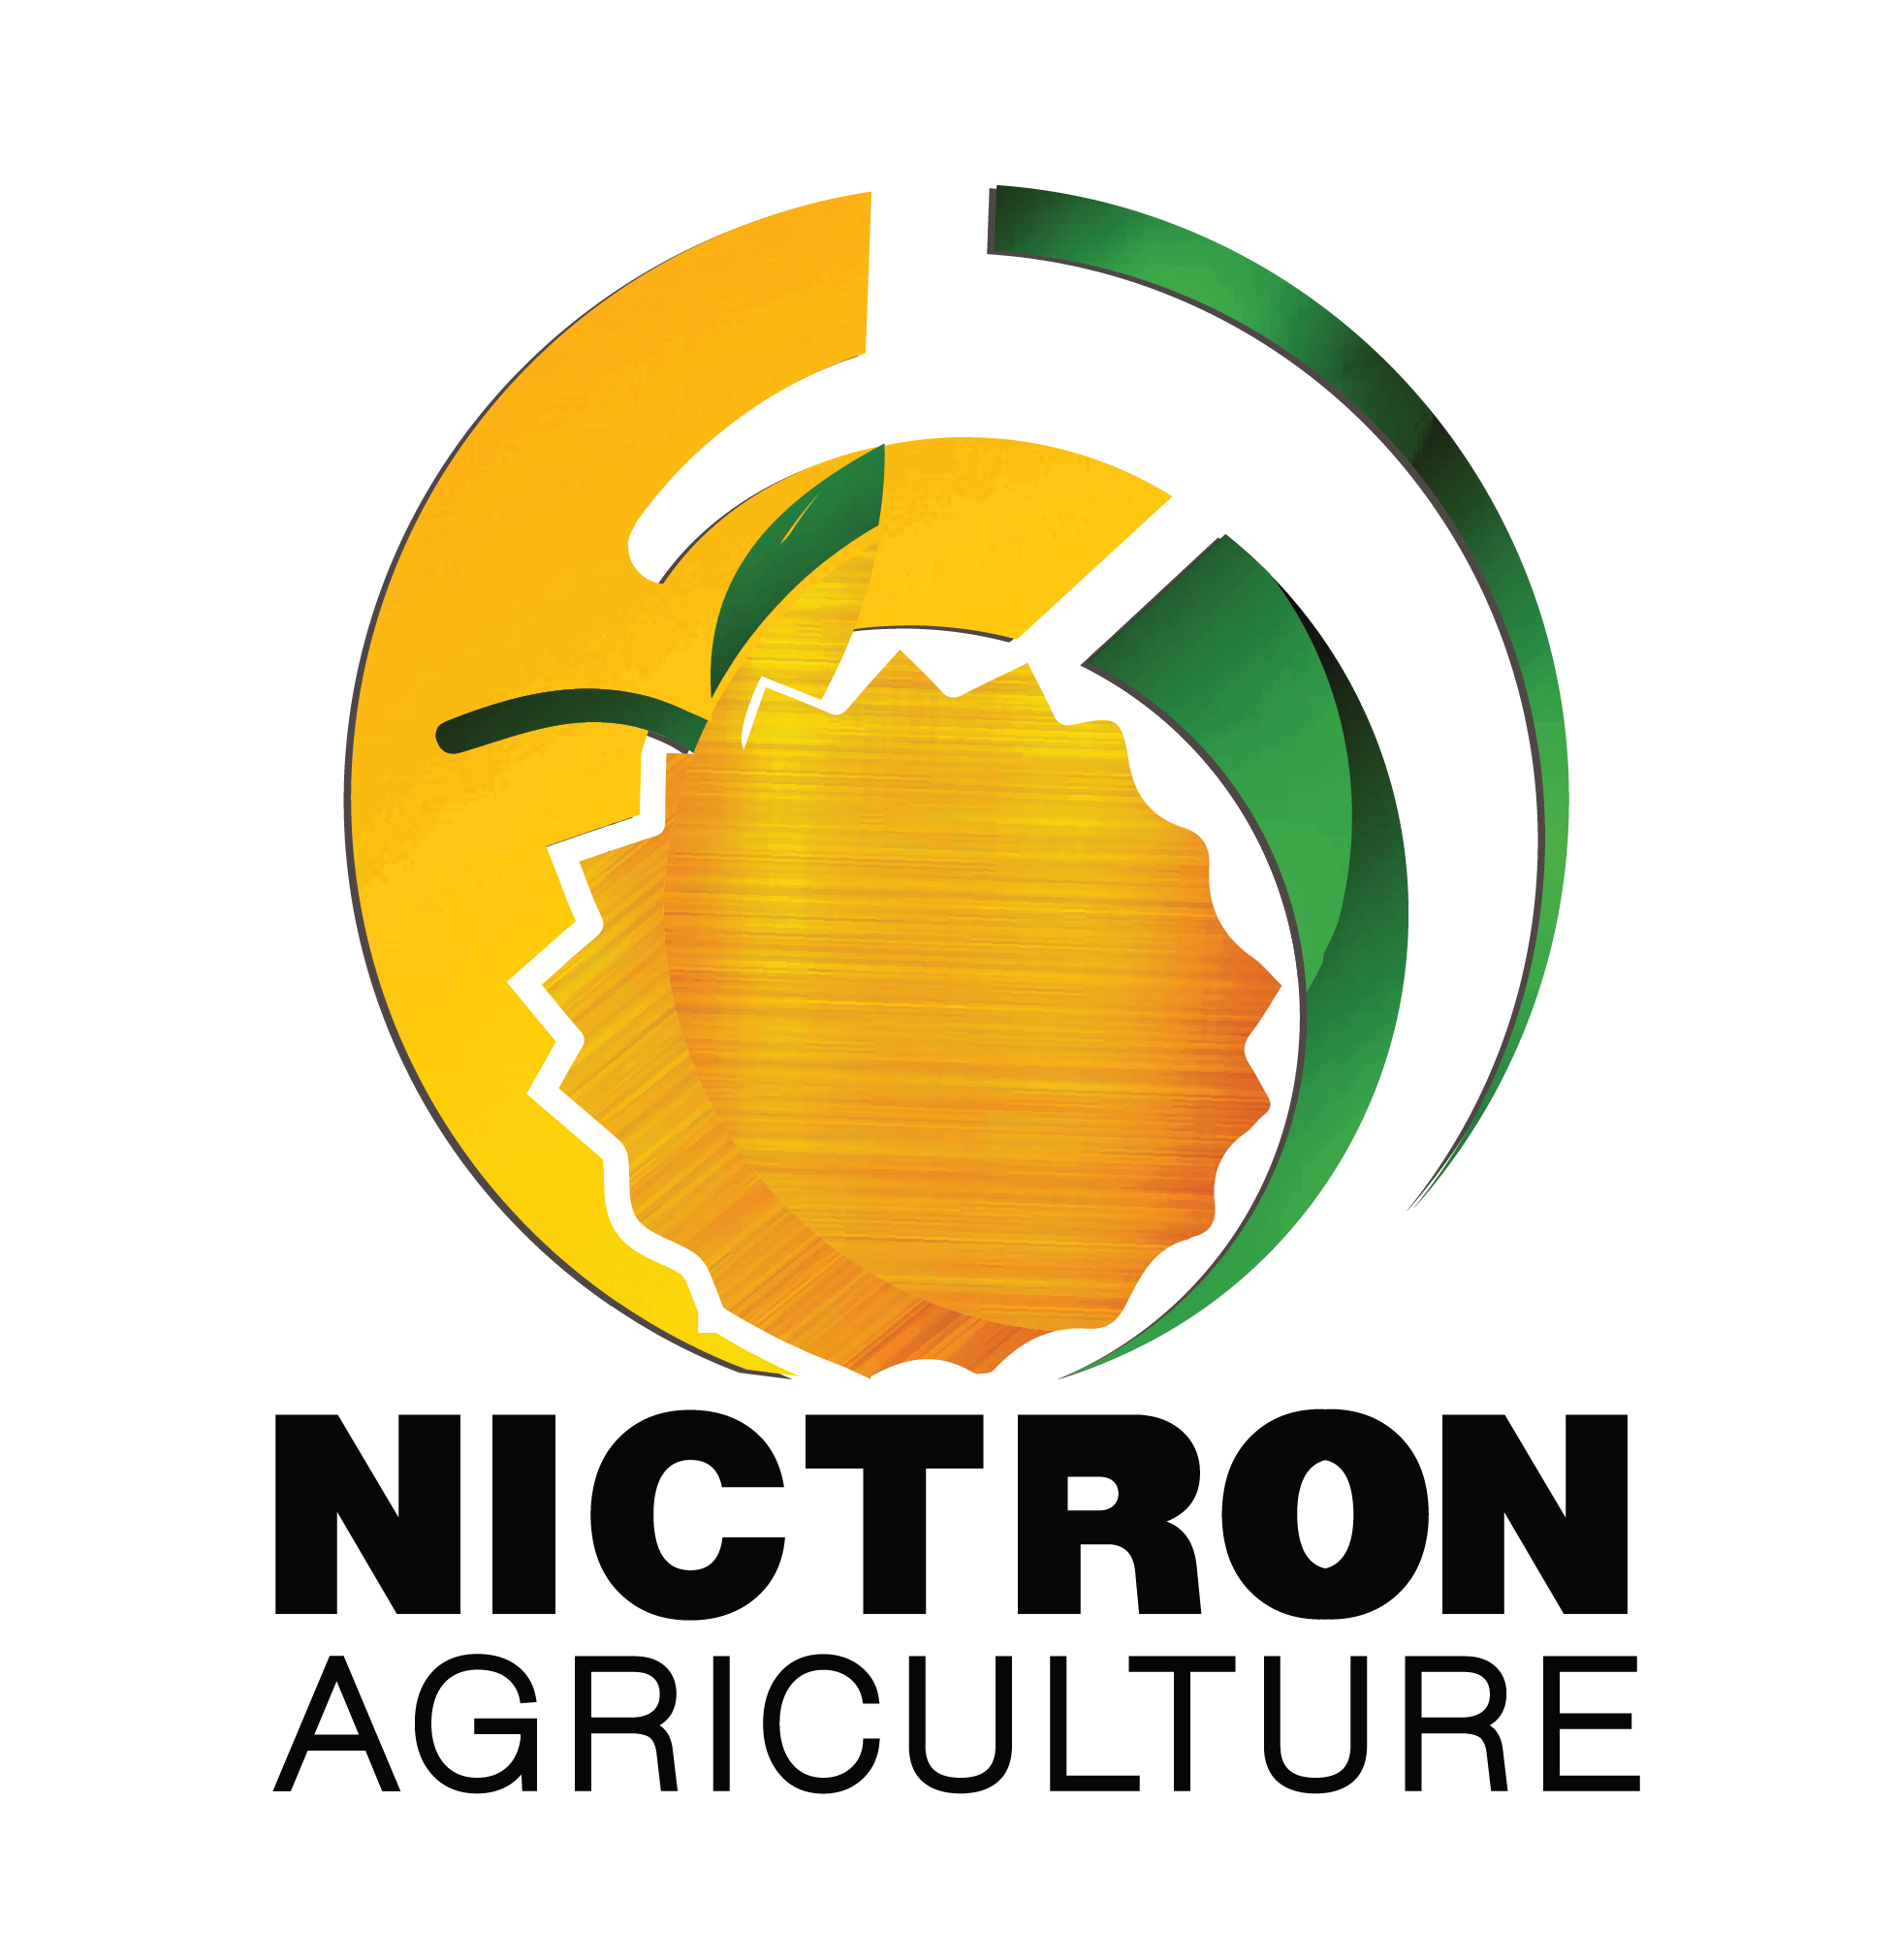 Nictron Agriculture